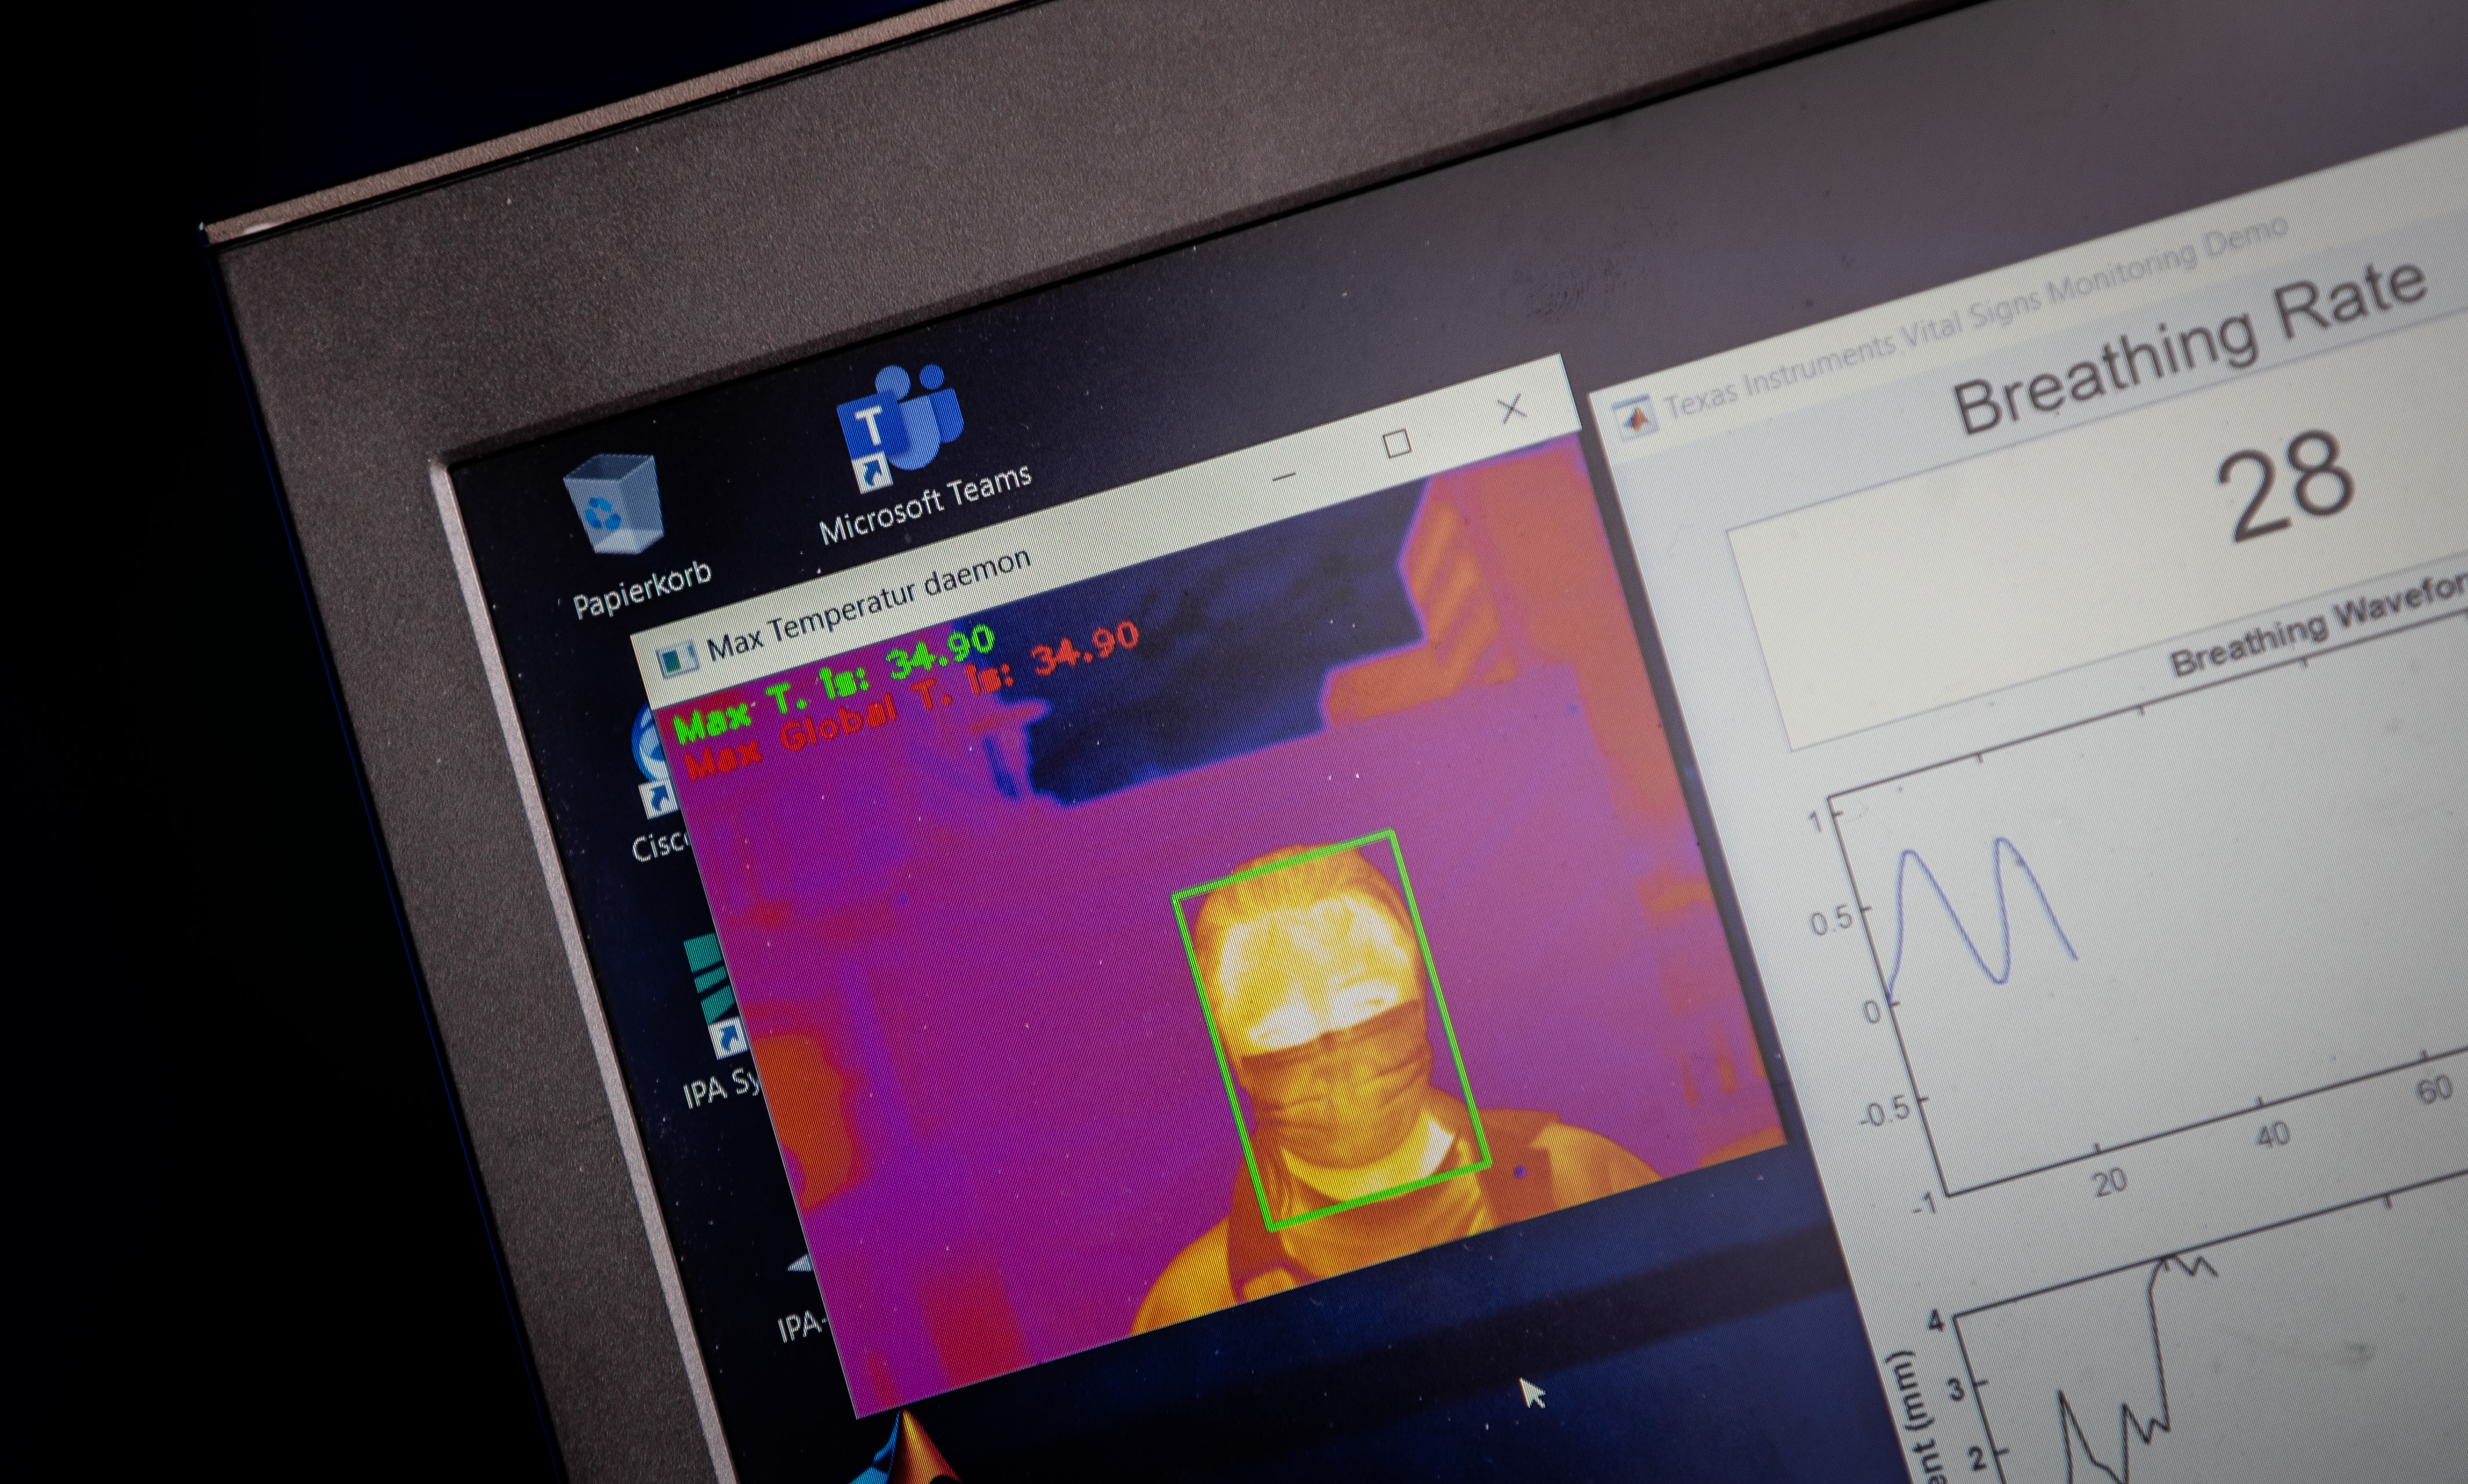 Detail of test evaluation with infrared image of the face and breath.